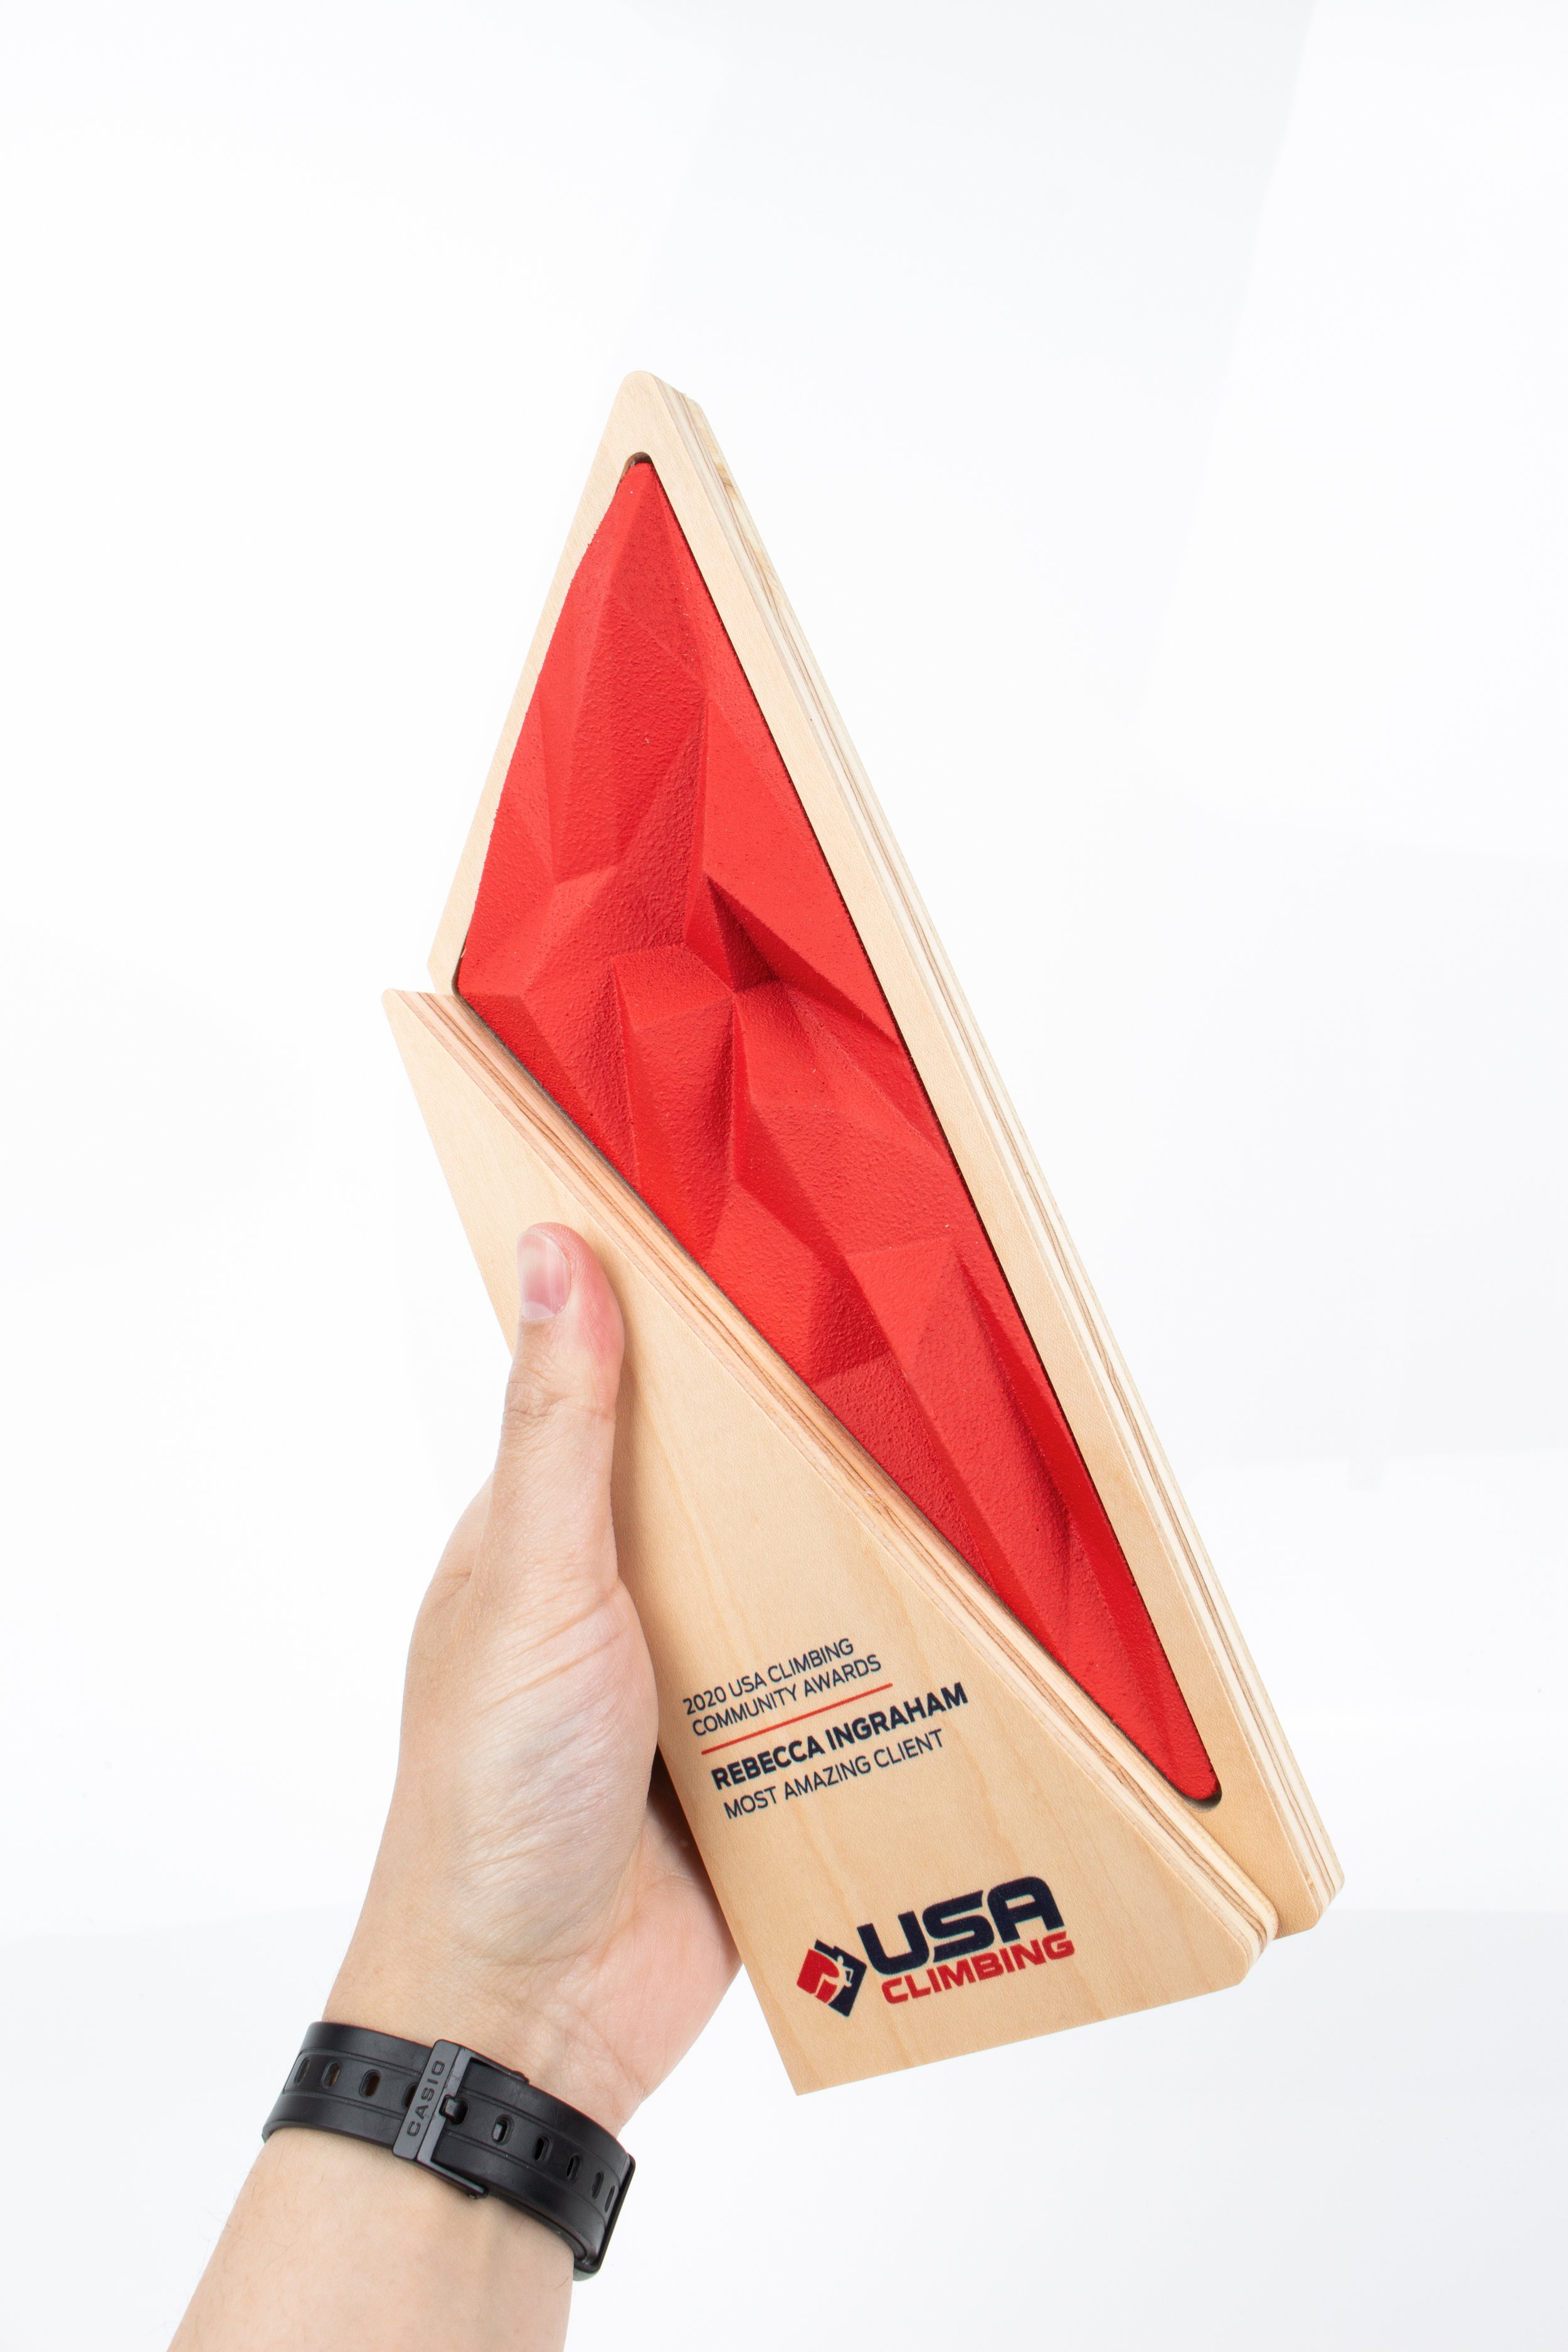 custom designed and unique award trophies for corporate event employee recognition 